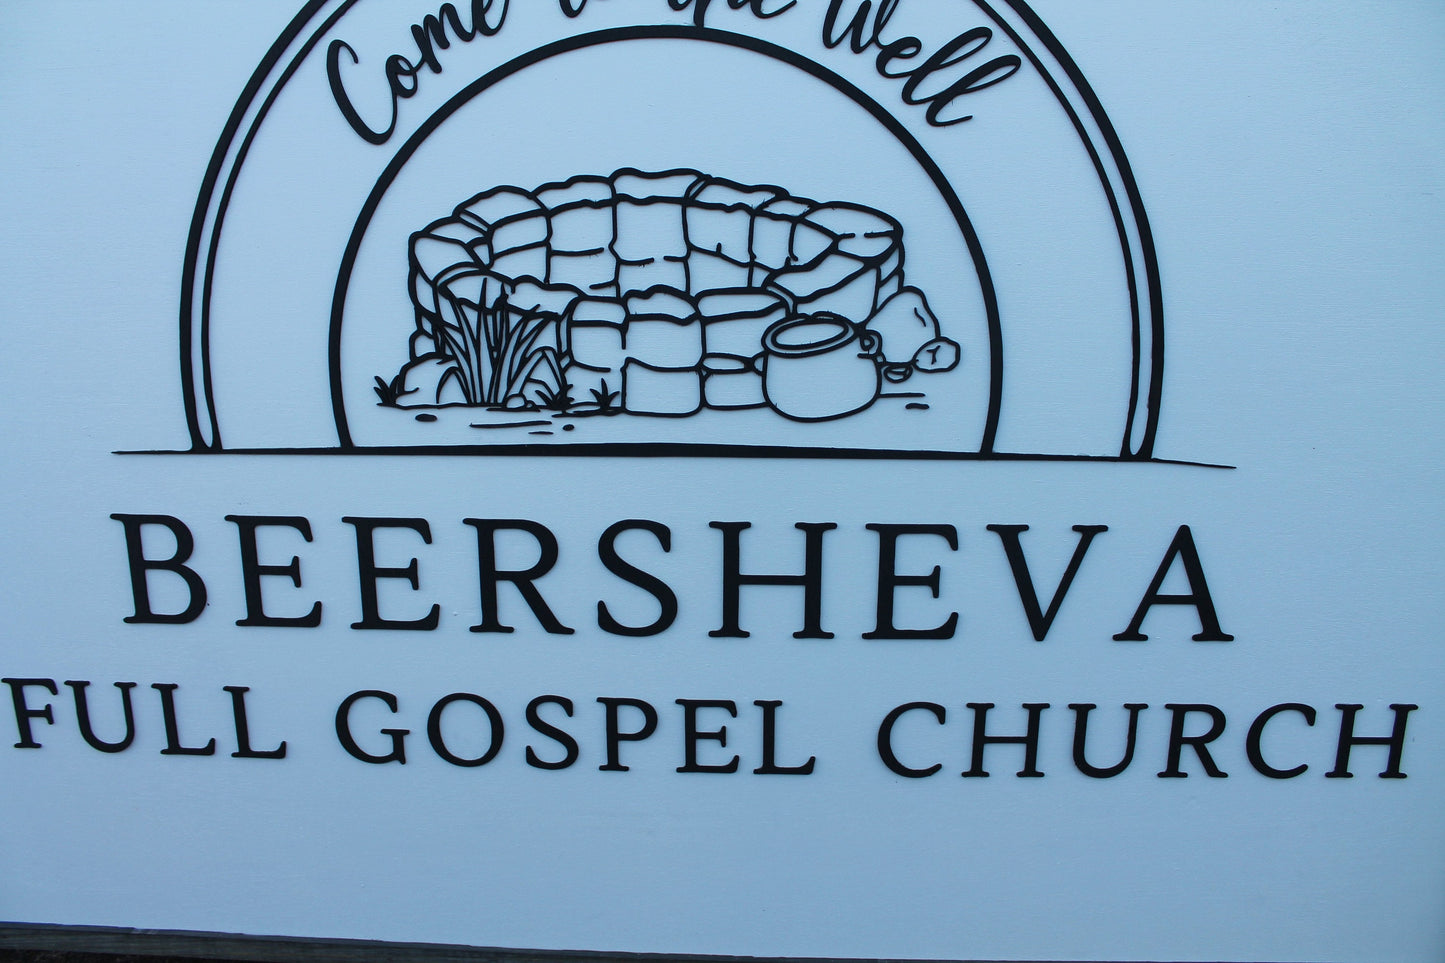 Custom Church Sign Commerical Signage Come To The Well Gospel Faith Based Handmade 3D Laser Cut Logo Personalized Large Oversized Simple